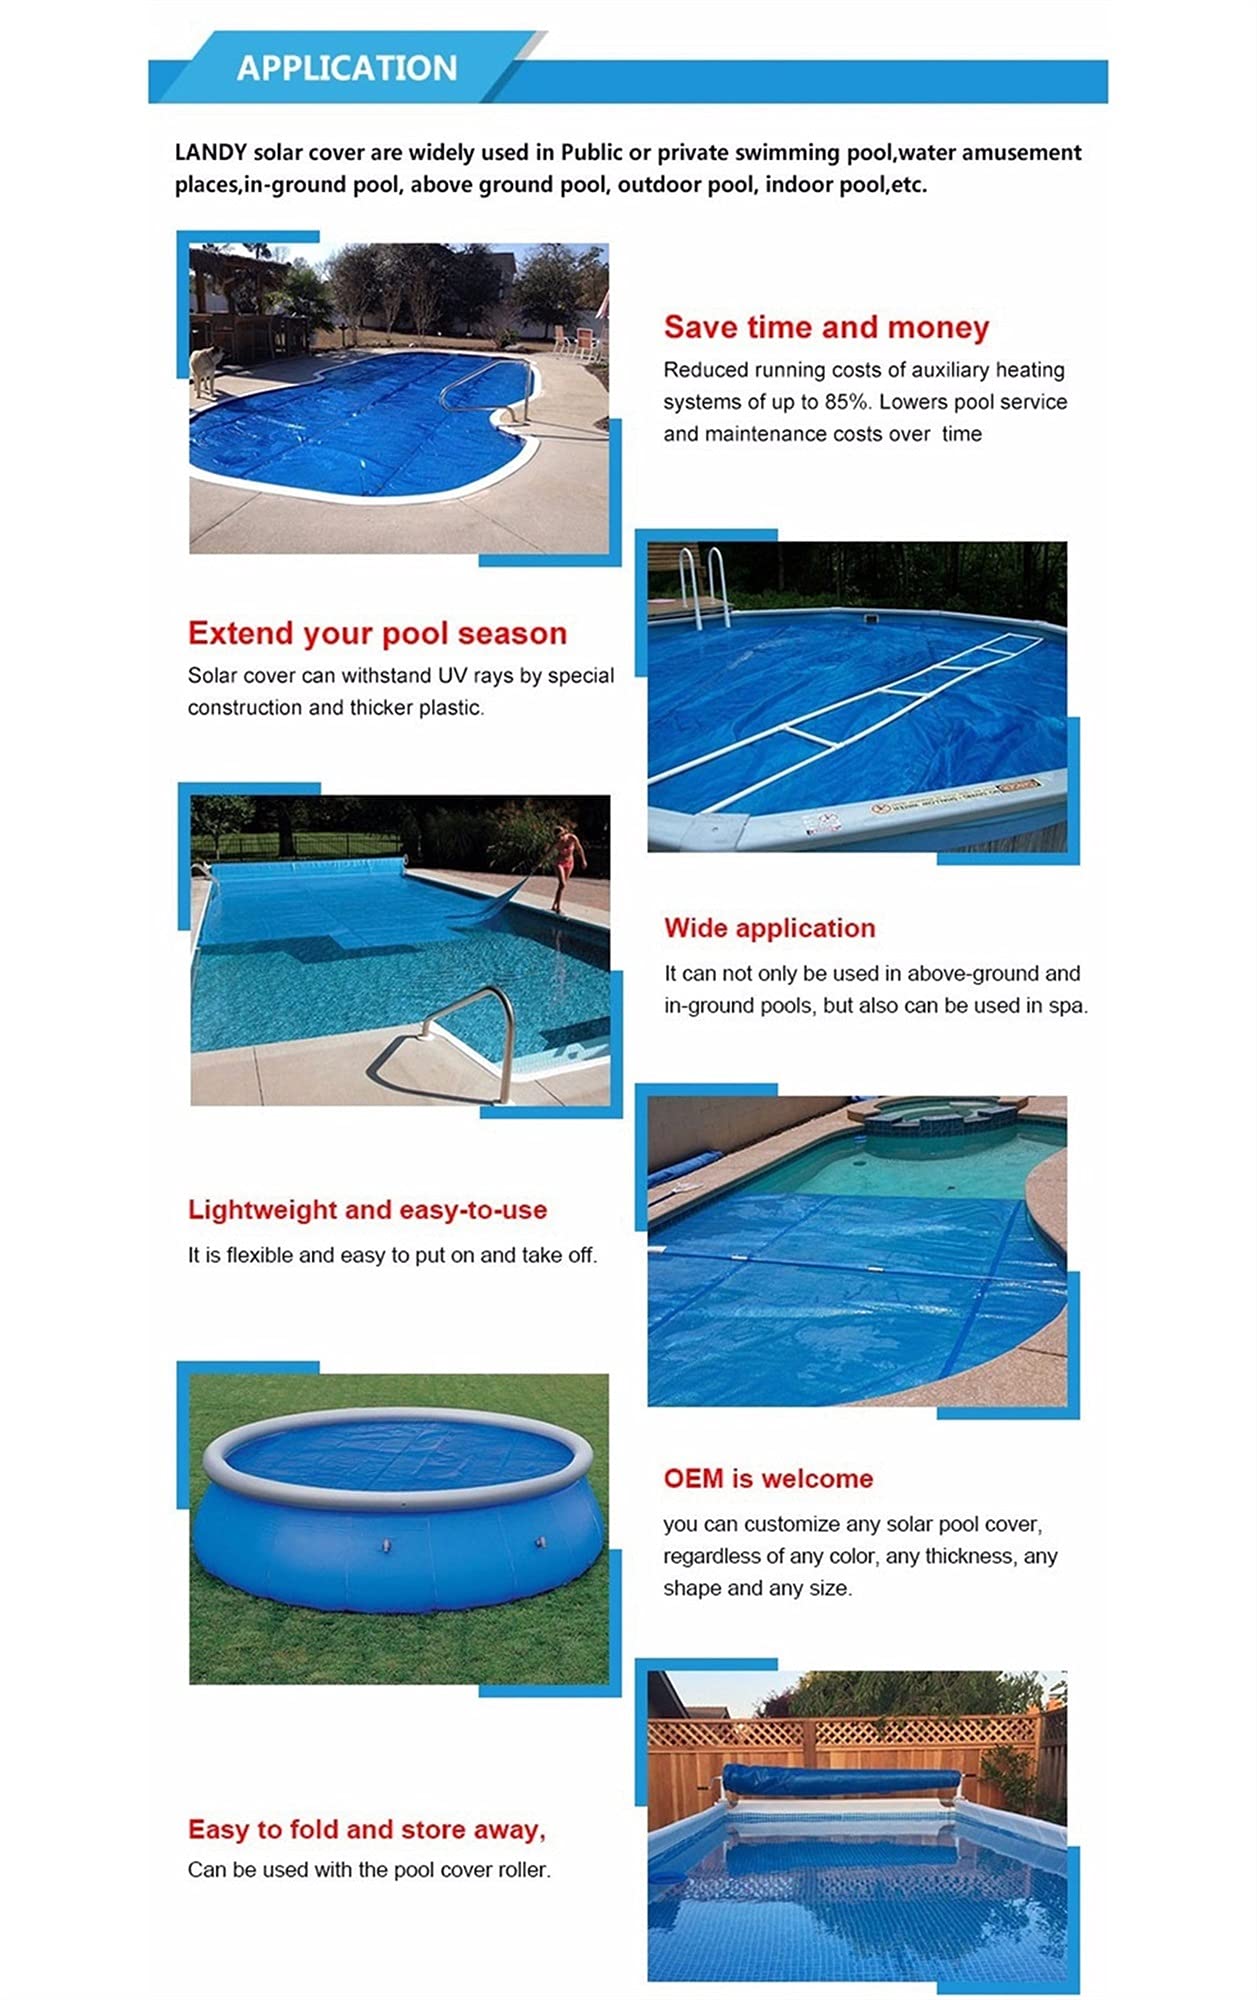 Are You Covered? The Benefits of Swimming Pool Covers